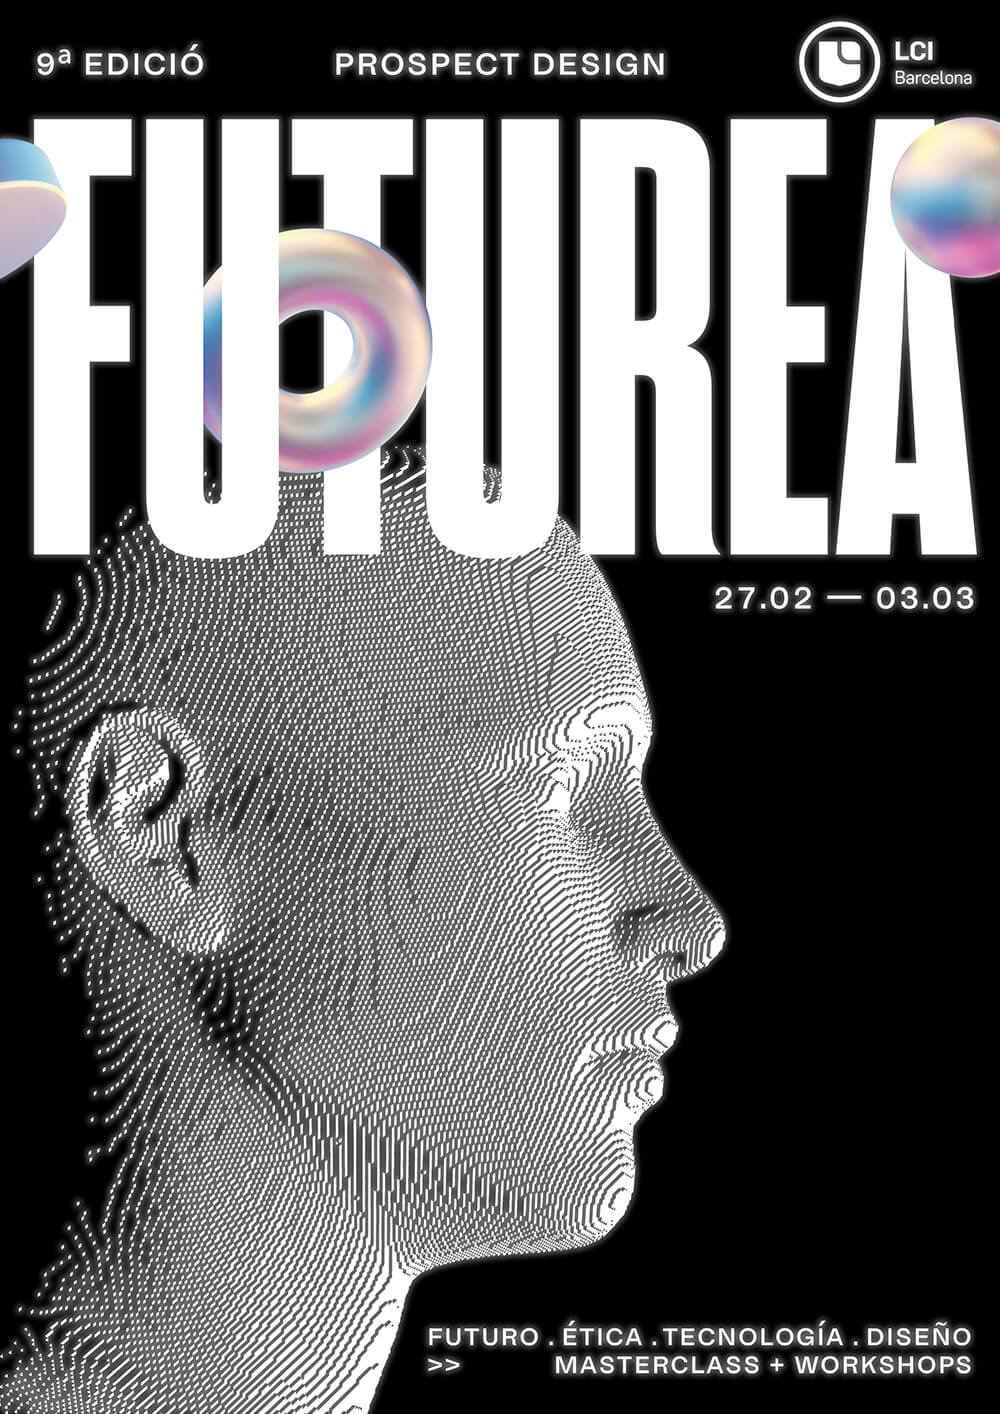 A striking poster for the 9th edition of FUTUREA, featuring a profile holographic image with dates and themes of future, ethics, technology, and design.